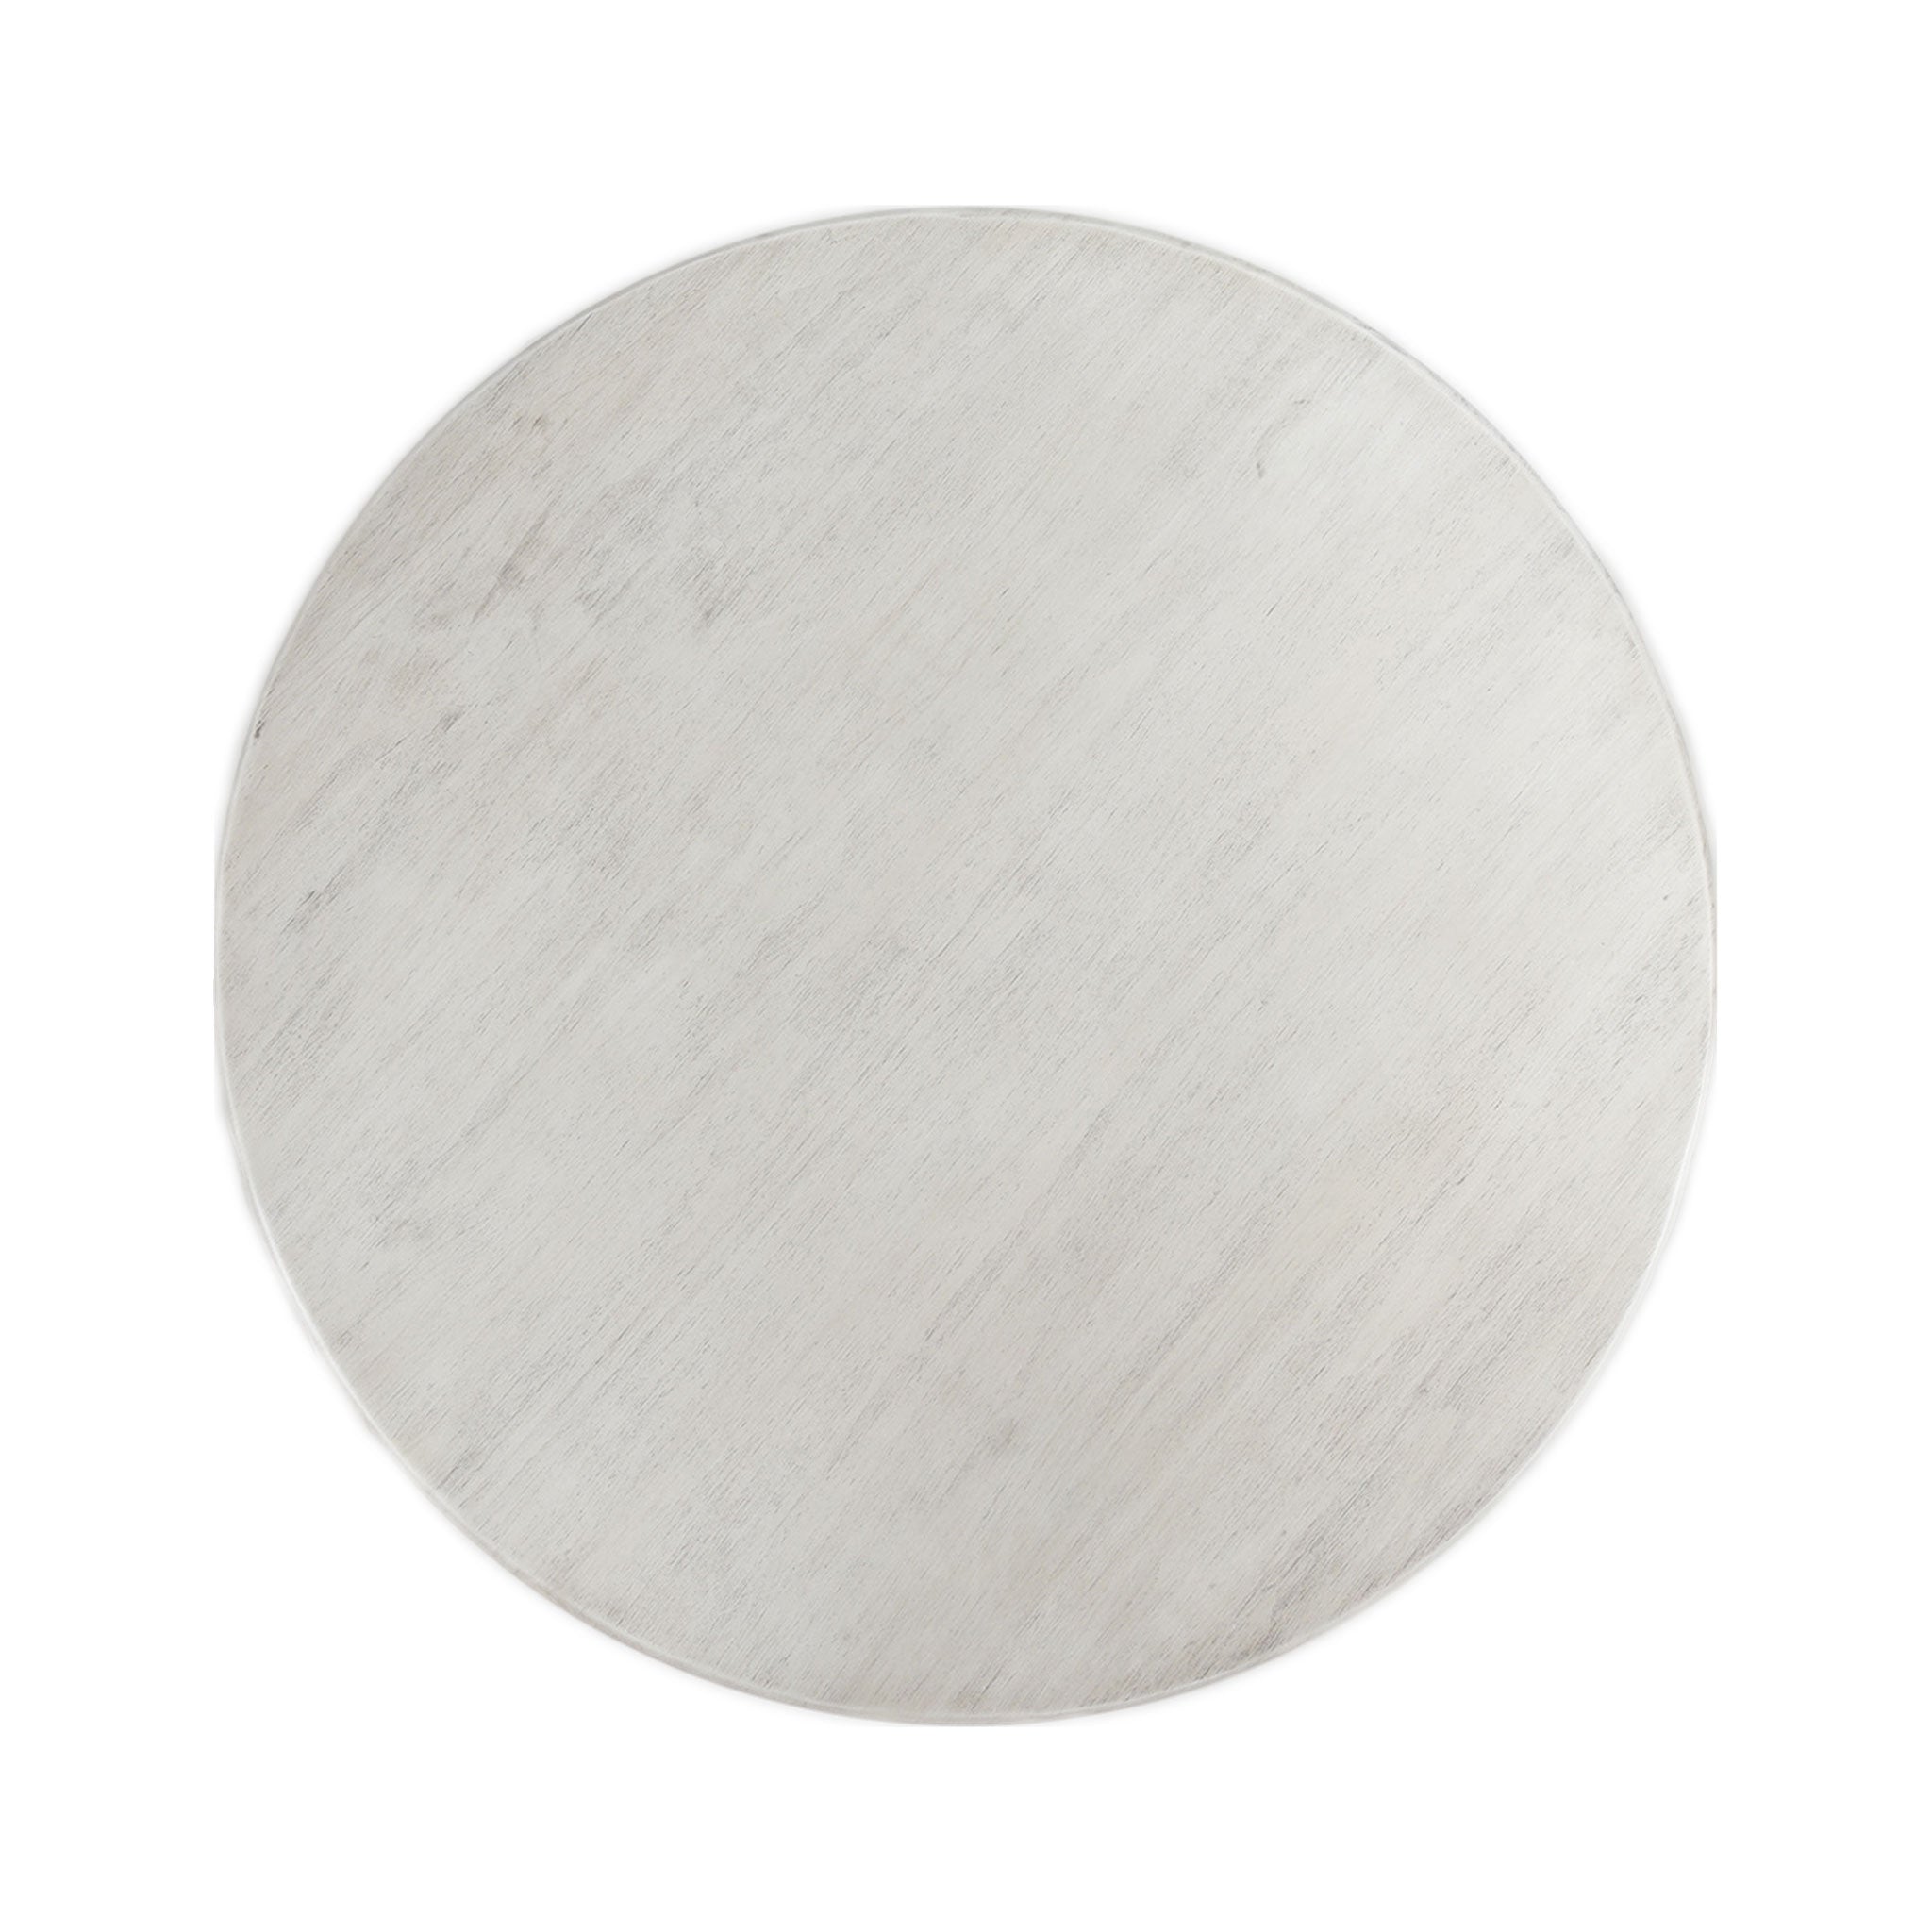 Lennon Round Dining Table, Sunbleached Ivory